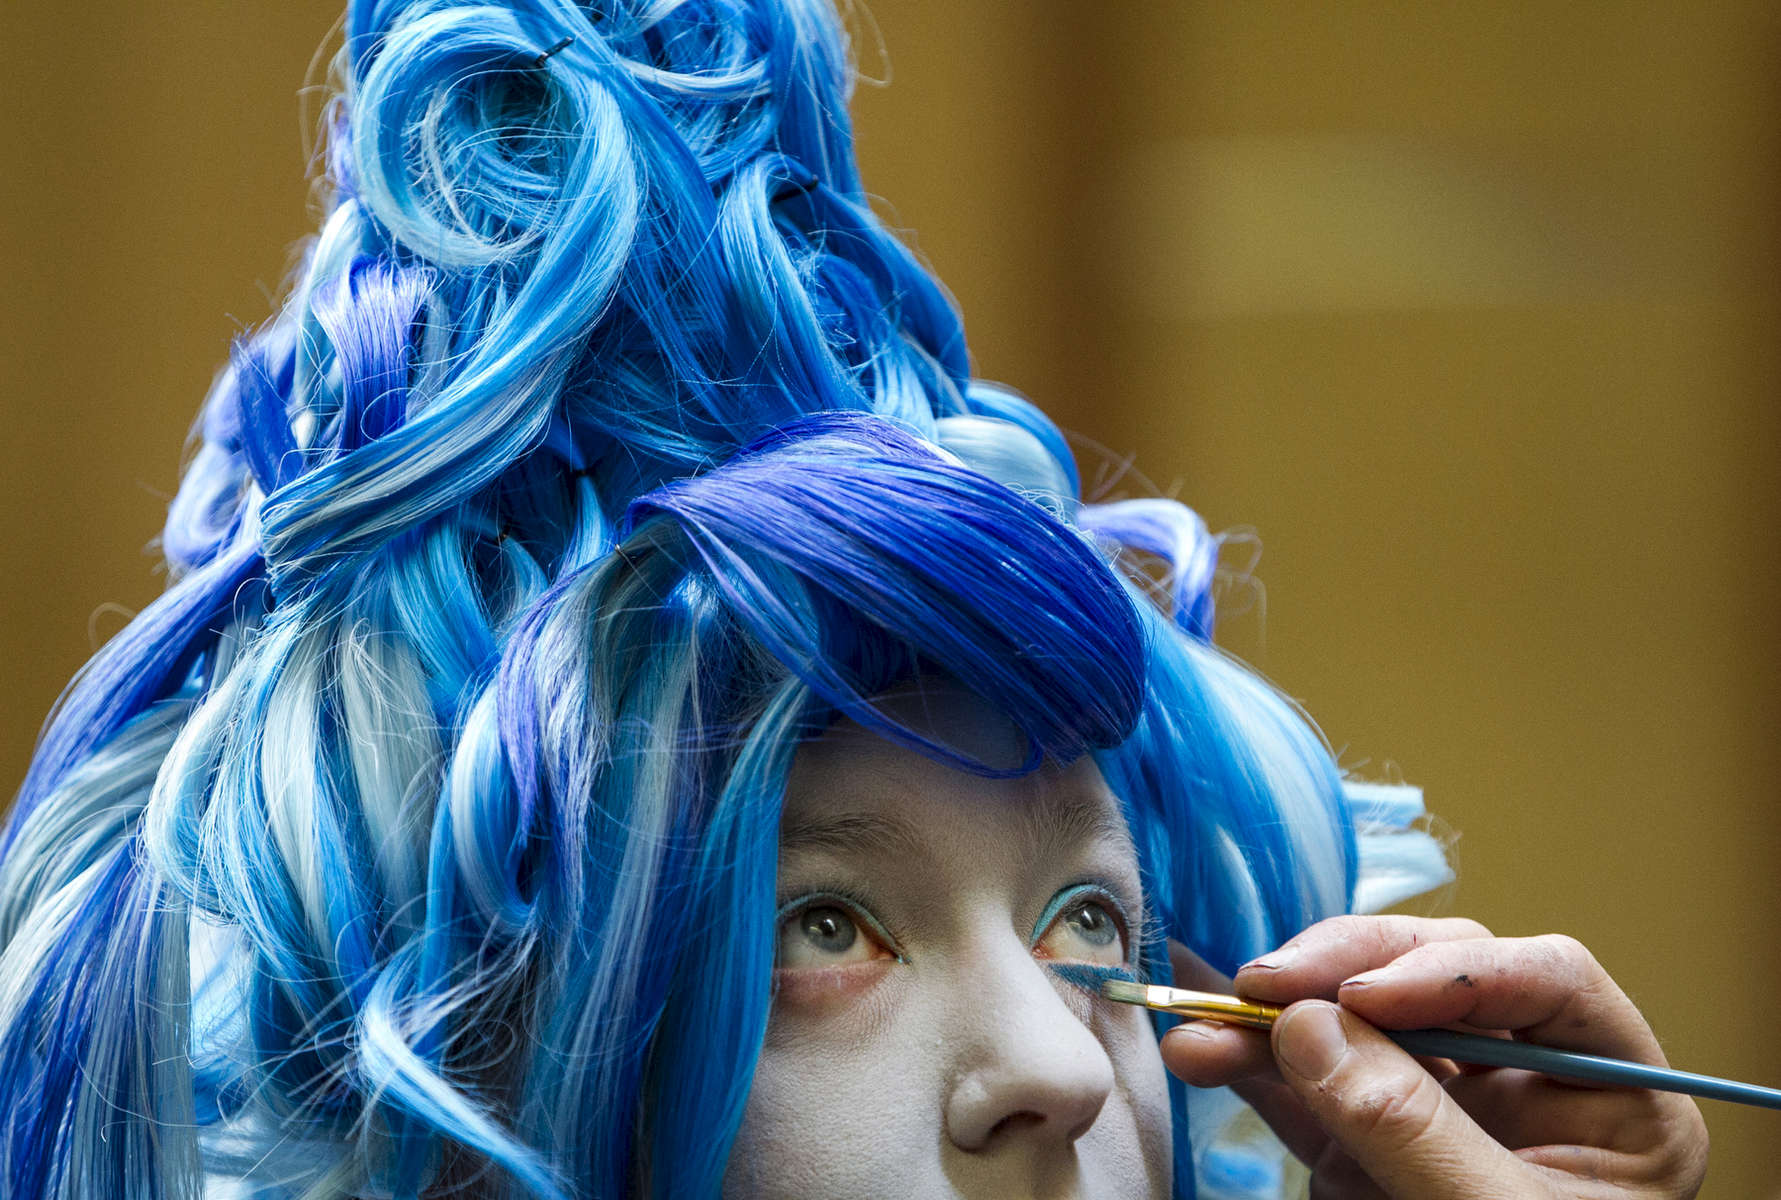 November 22, 2015 - Meagan Cross gets into character as a female version of Hades from Disney's Hercules with help from A.G. Howard, from Howardart Studios, during the final day of the sixth annual Memphis Comic and Fantasy Convention at Hilton Memphis. (Mike Brown/The Commercial Appeal)